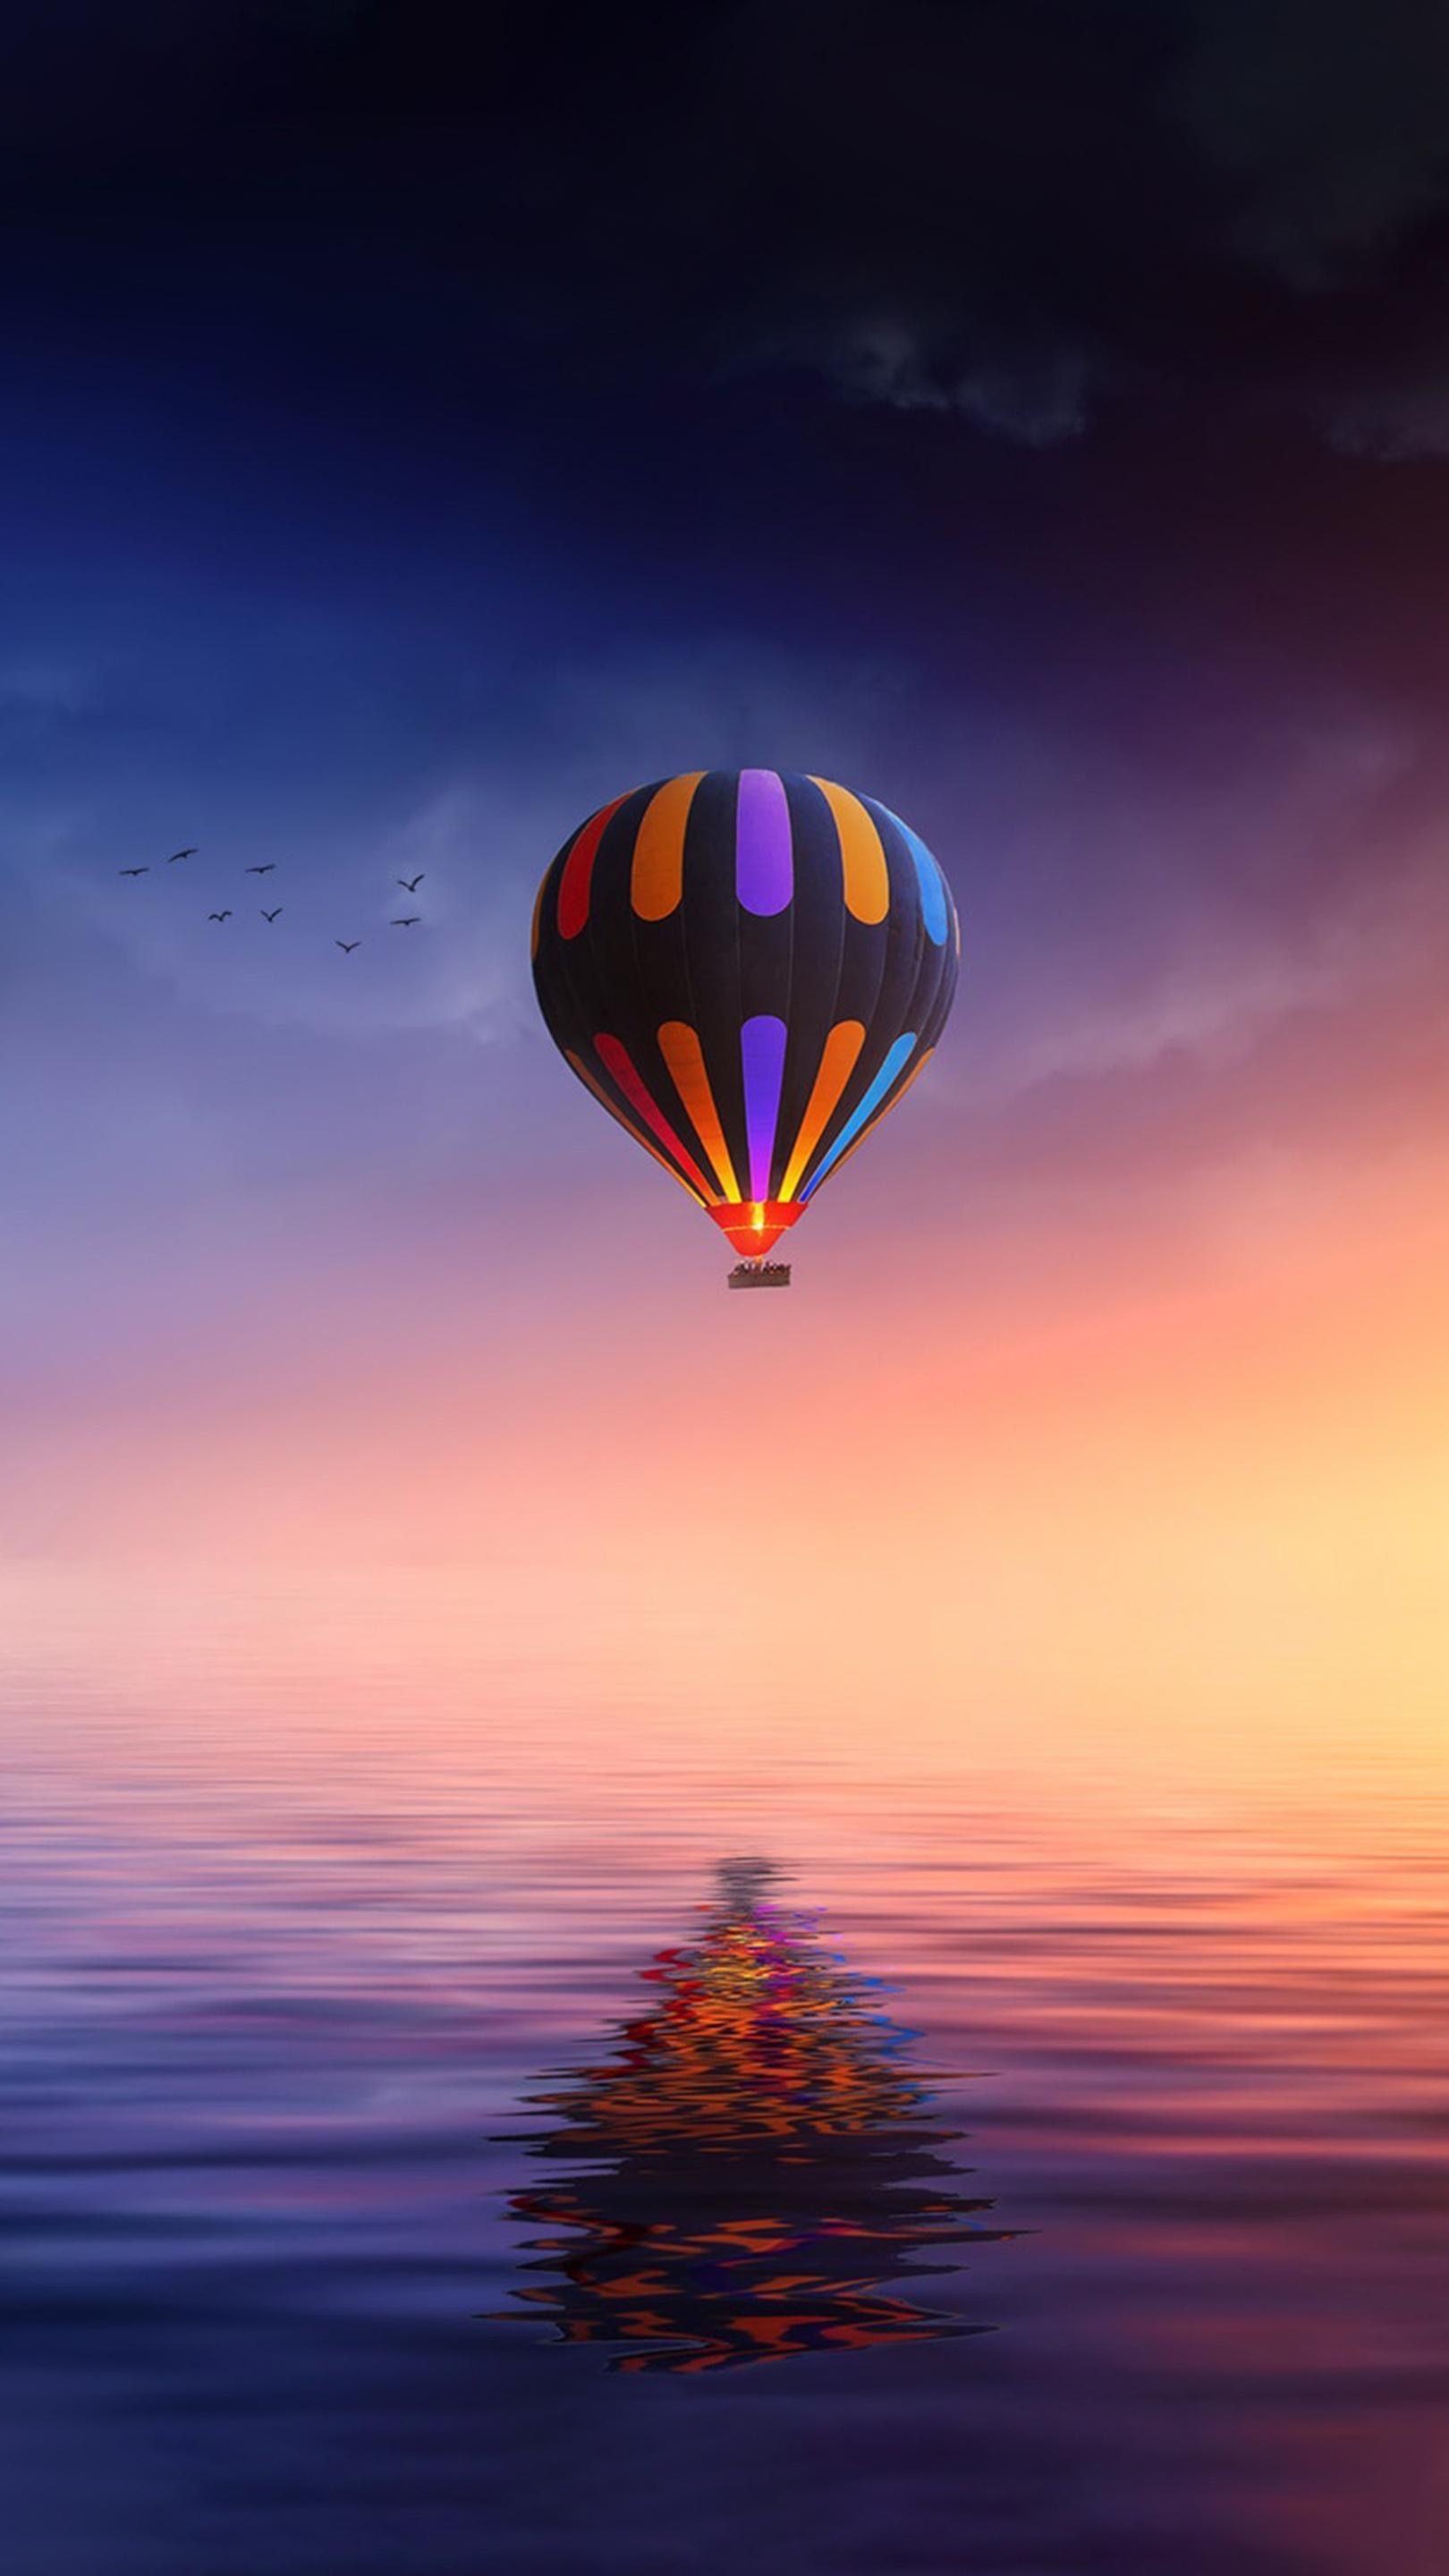 Wallpaper You Deserve Every Happiness, Happiness, Fear, Water, Hot Air Ballooning, Background Free Image